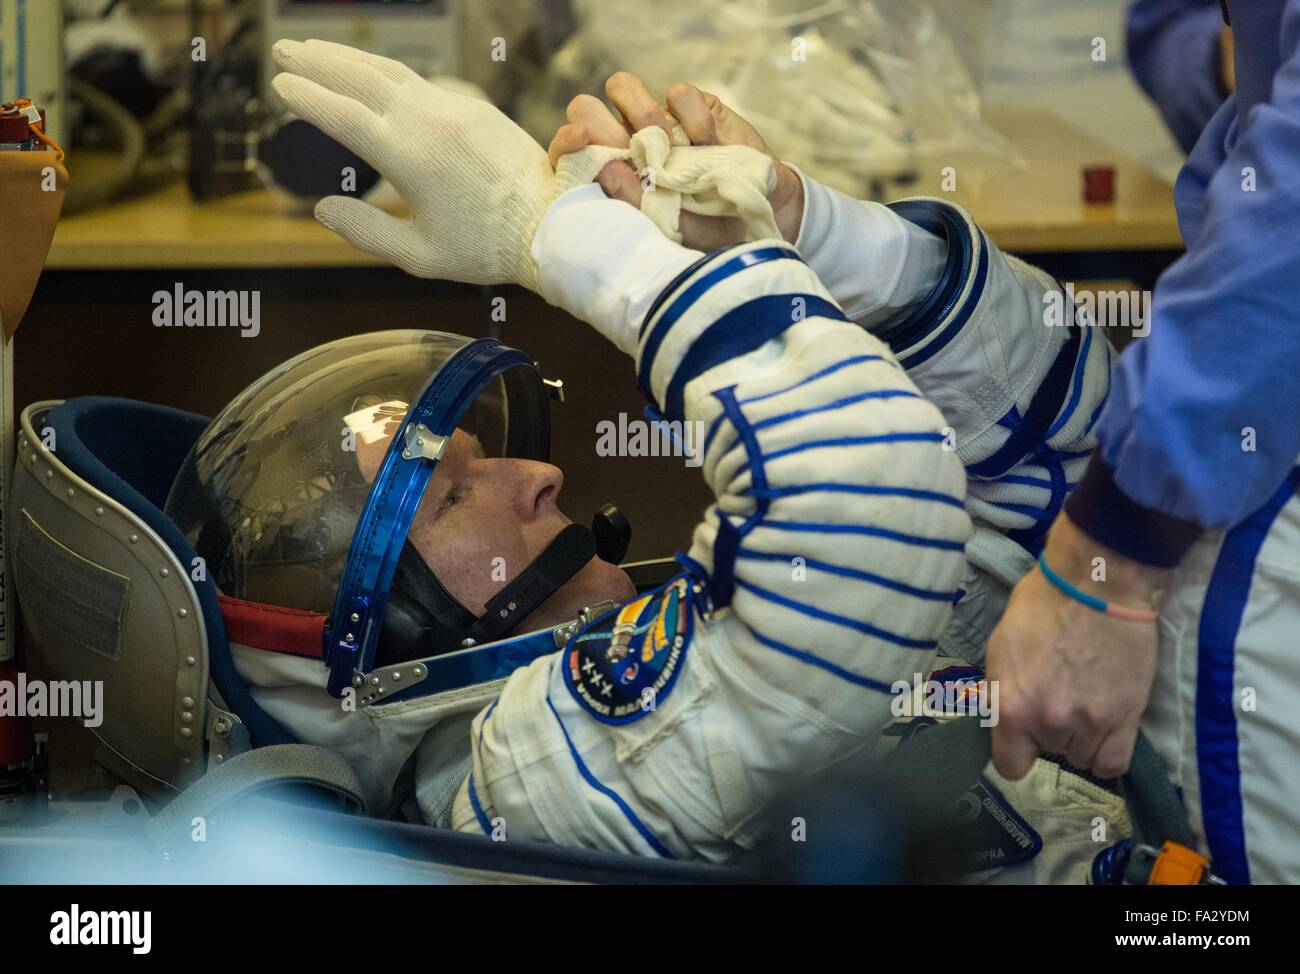 International Space Station Expedition 46 crew member British astronaut Tim Peake has his Sokol space suits adjusted in Building 254 before launch onboard the Soyuz TMA-19M spacecraft December 15, 2015 in Baikonur, Kazakhstan. Stock Photo